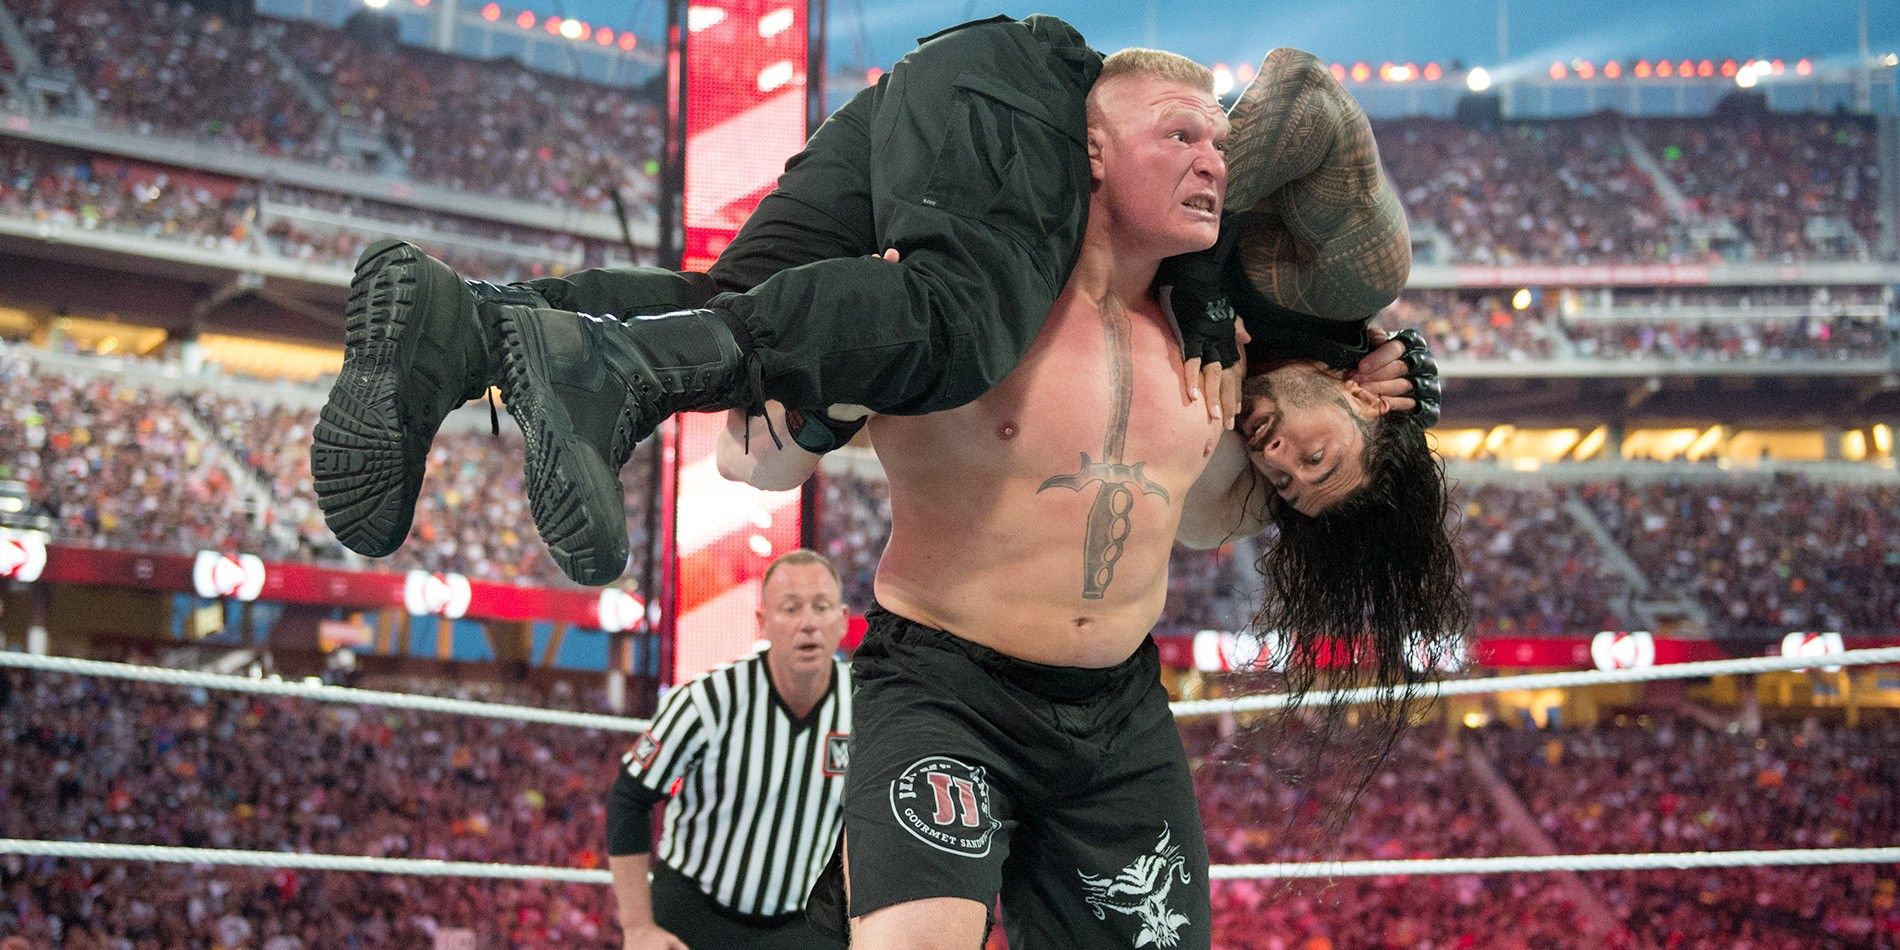 Brock Lesnar and Roman Reigns at WWE Wrestlemania